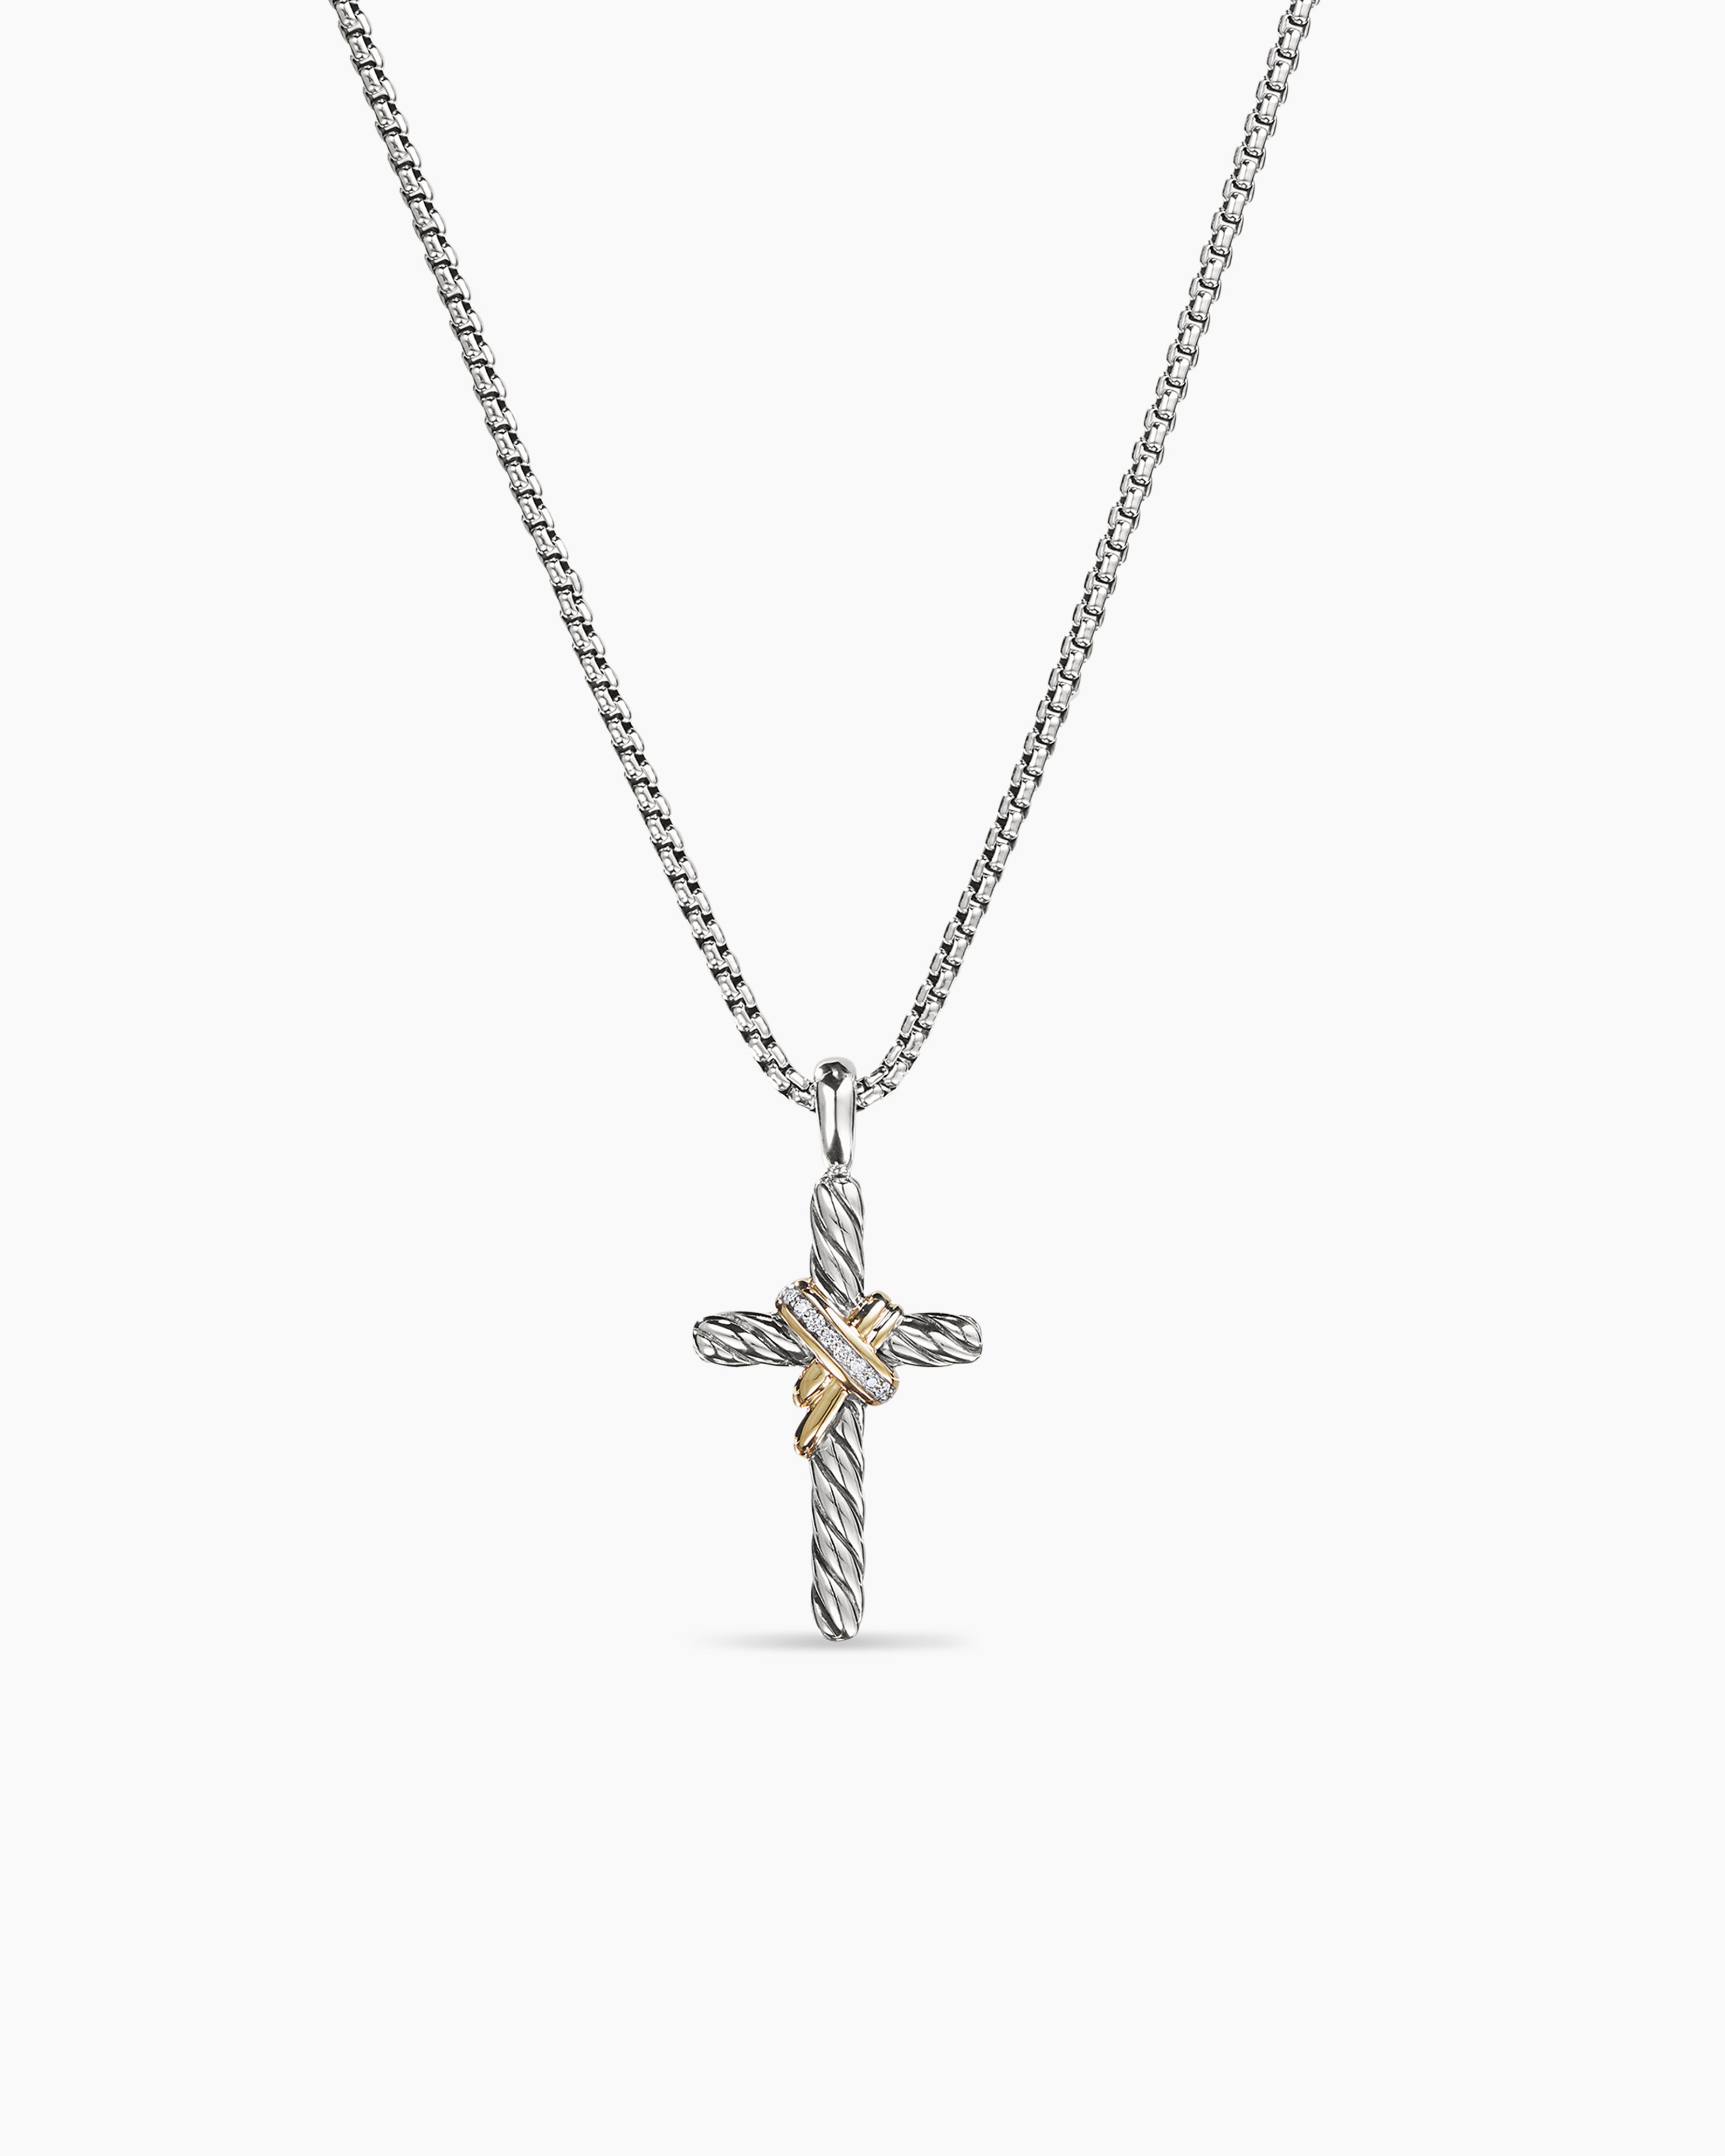 X Cross Necklace in Sterling Silver with 14K Yellow Gold and